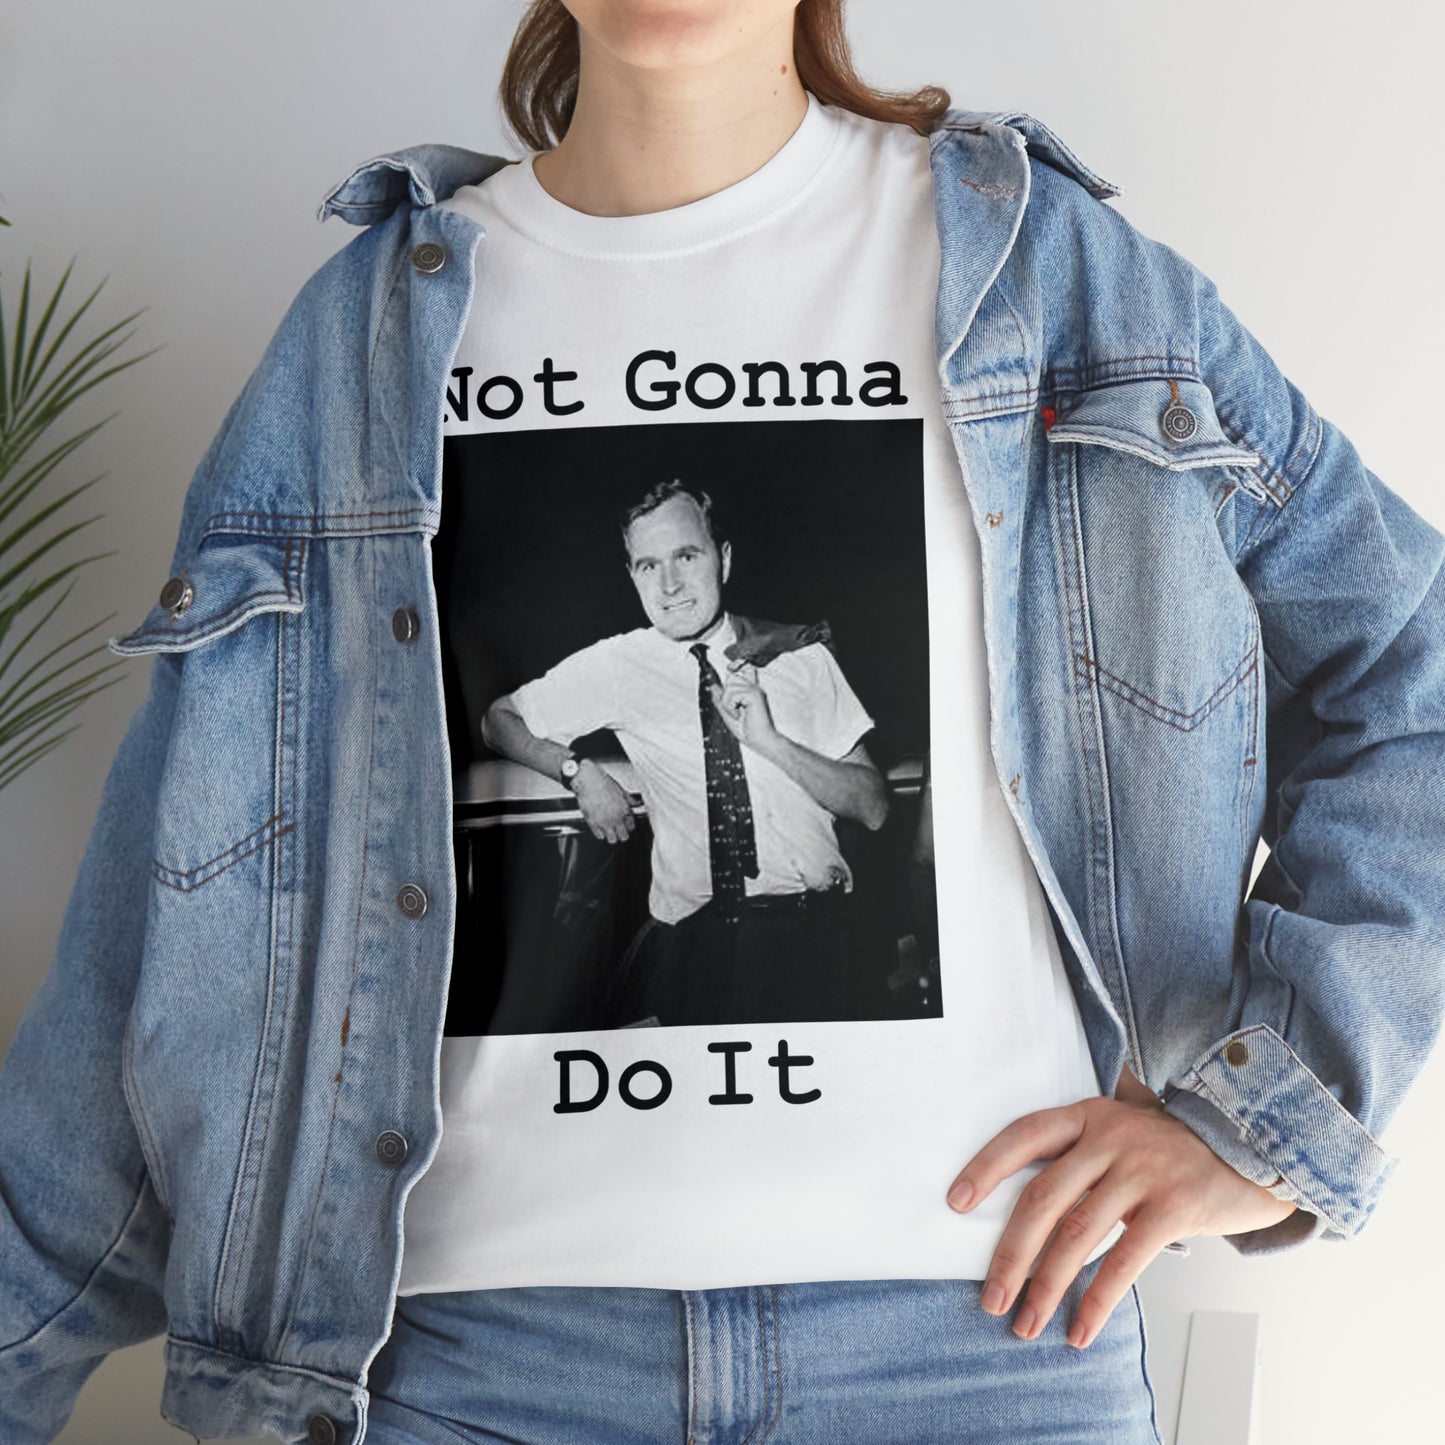 Not Gonna Do It - Hurts Shirts Collection